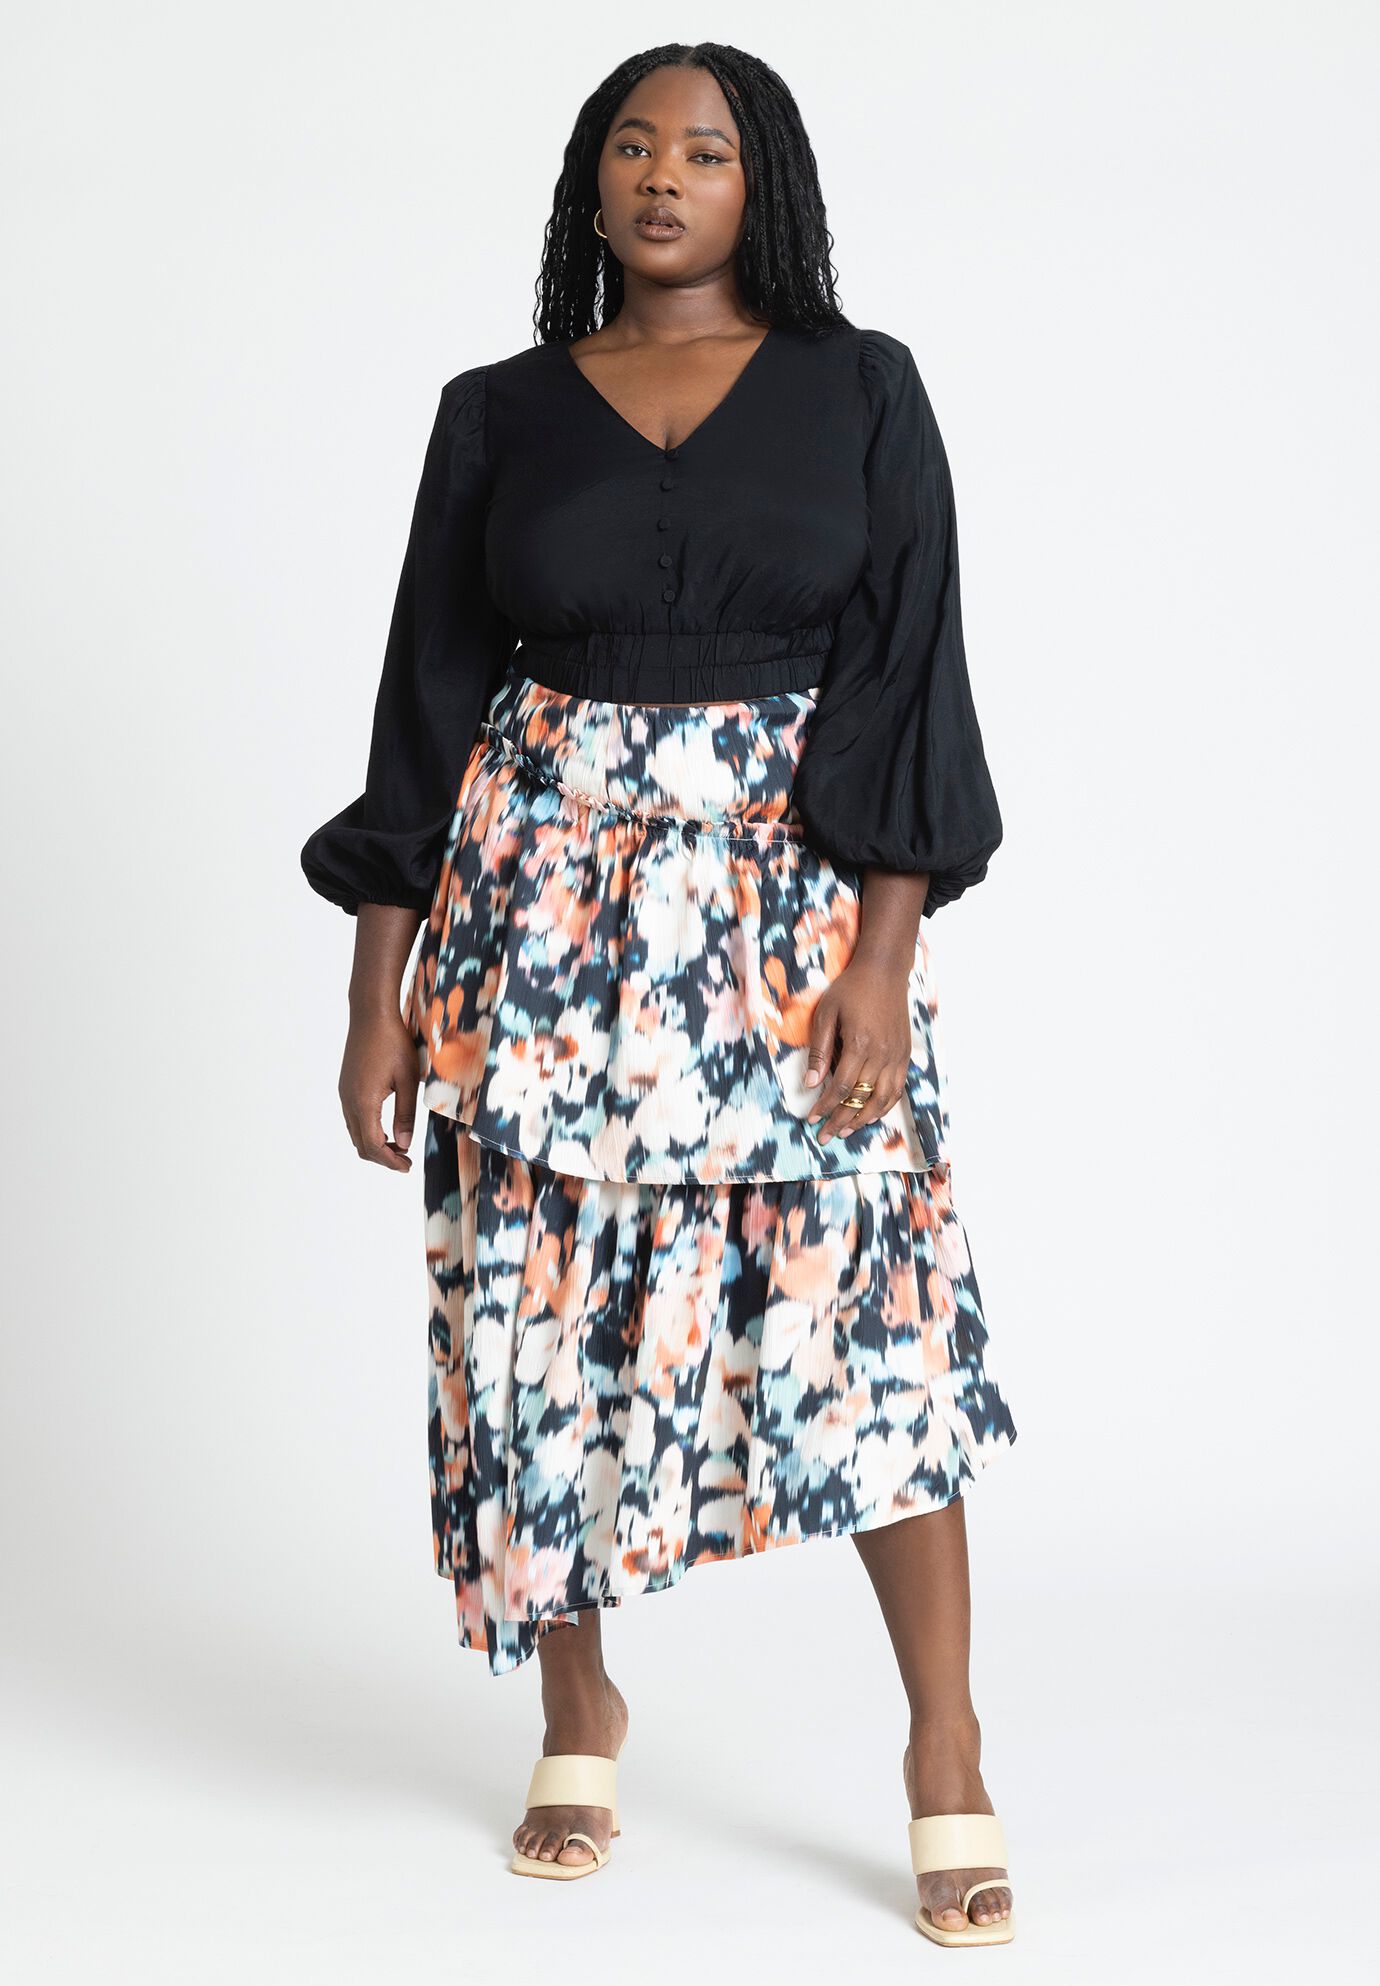 Plus Size Women Asym Tiered Printed Skirt By ( Size 20 )